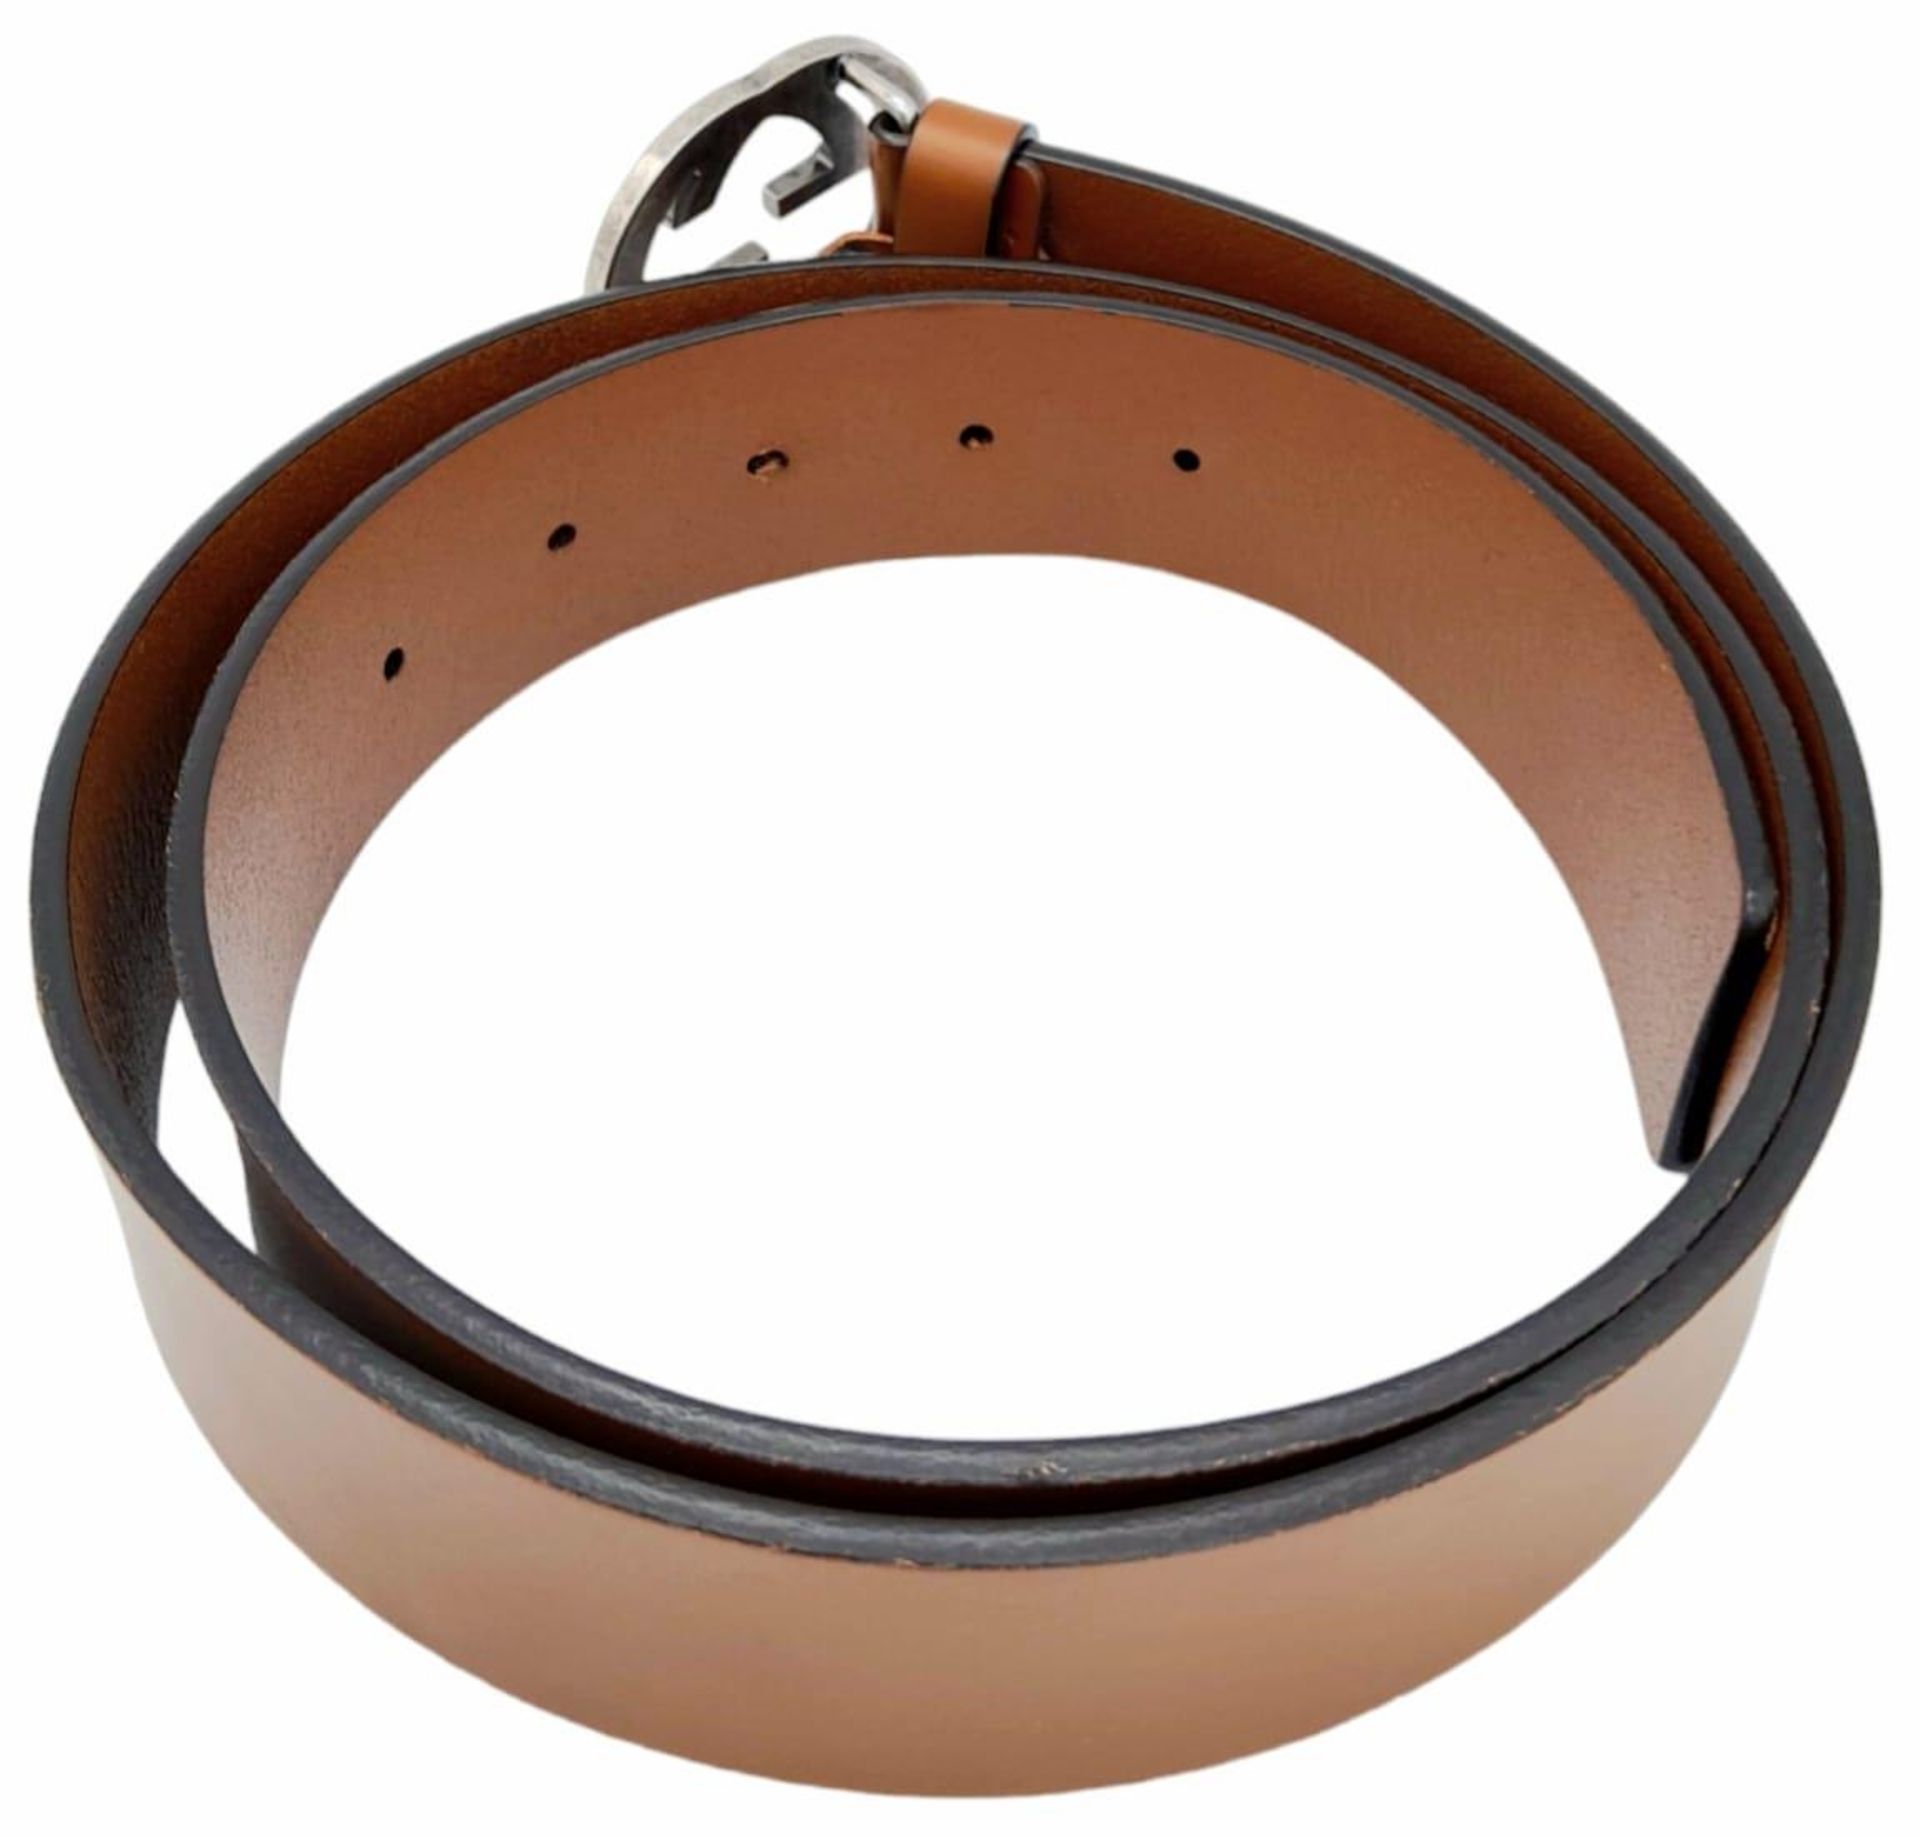 A Gucci Interlocking GG Signature Leather Belt. Brown Calfskin Leather, Silver Tone Hardware. - Image 4 of 6